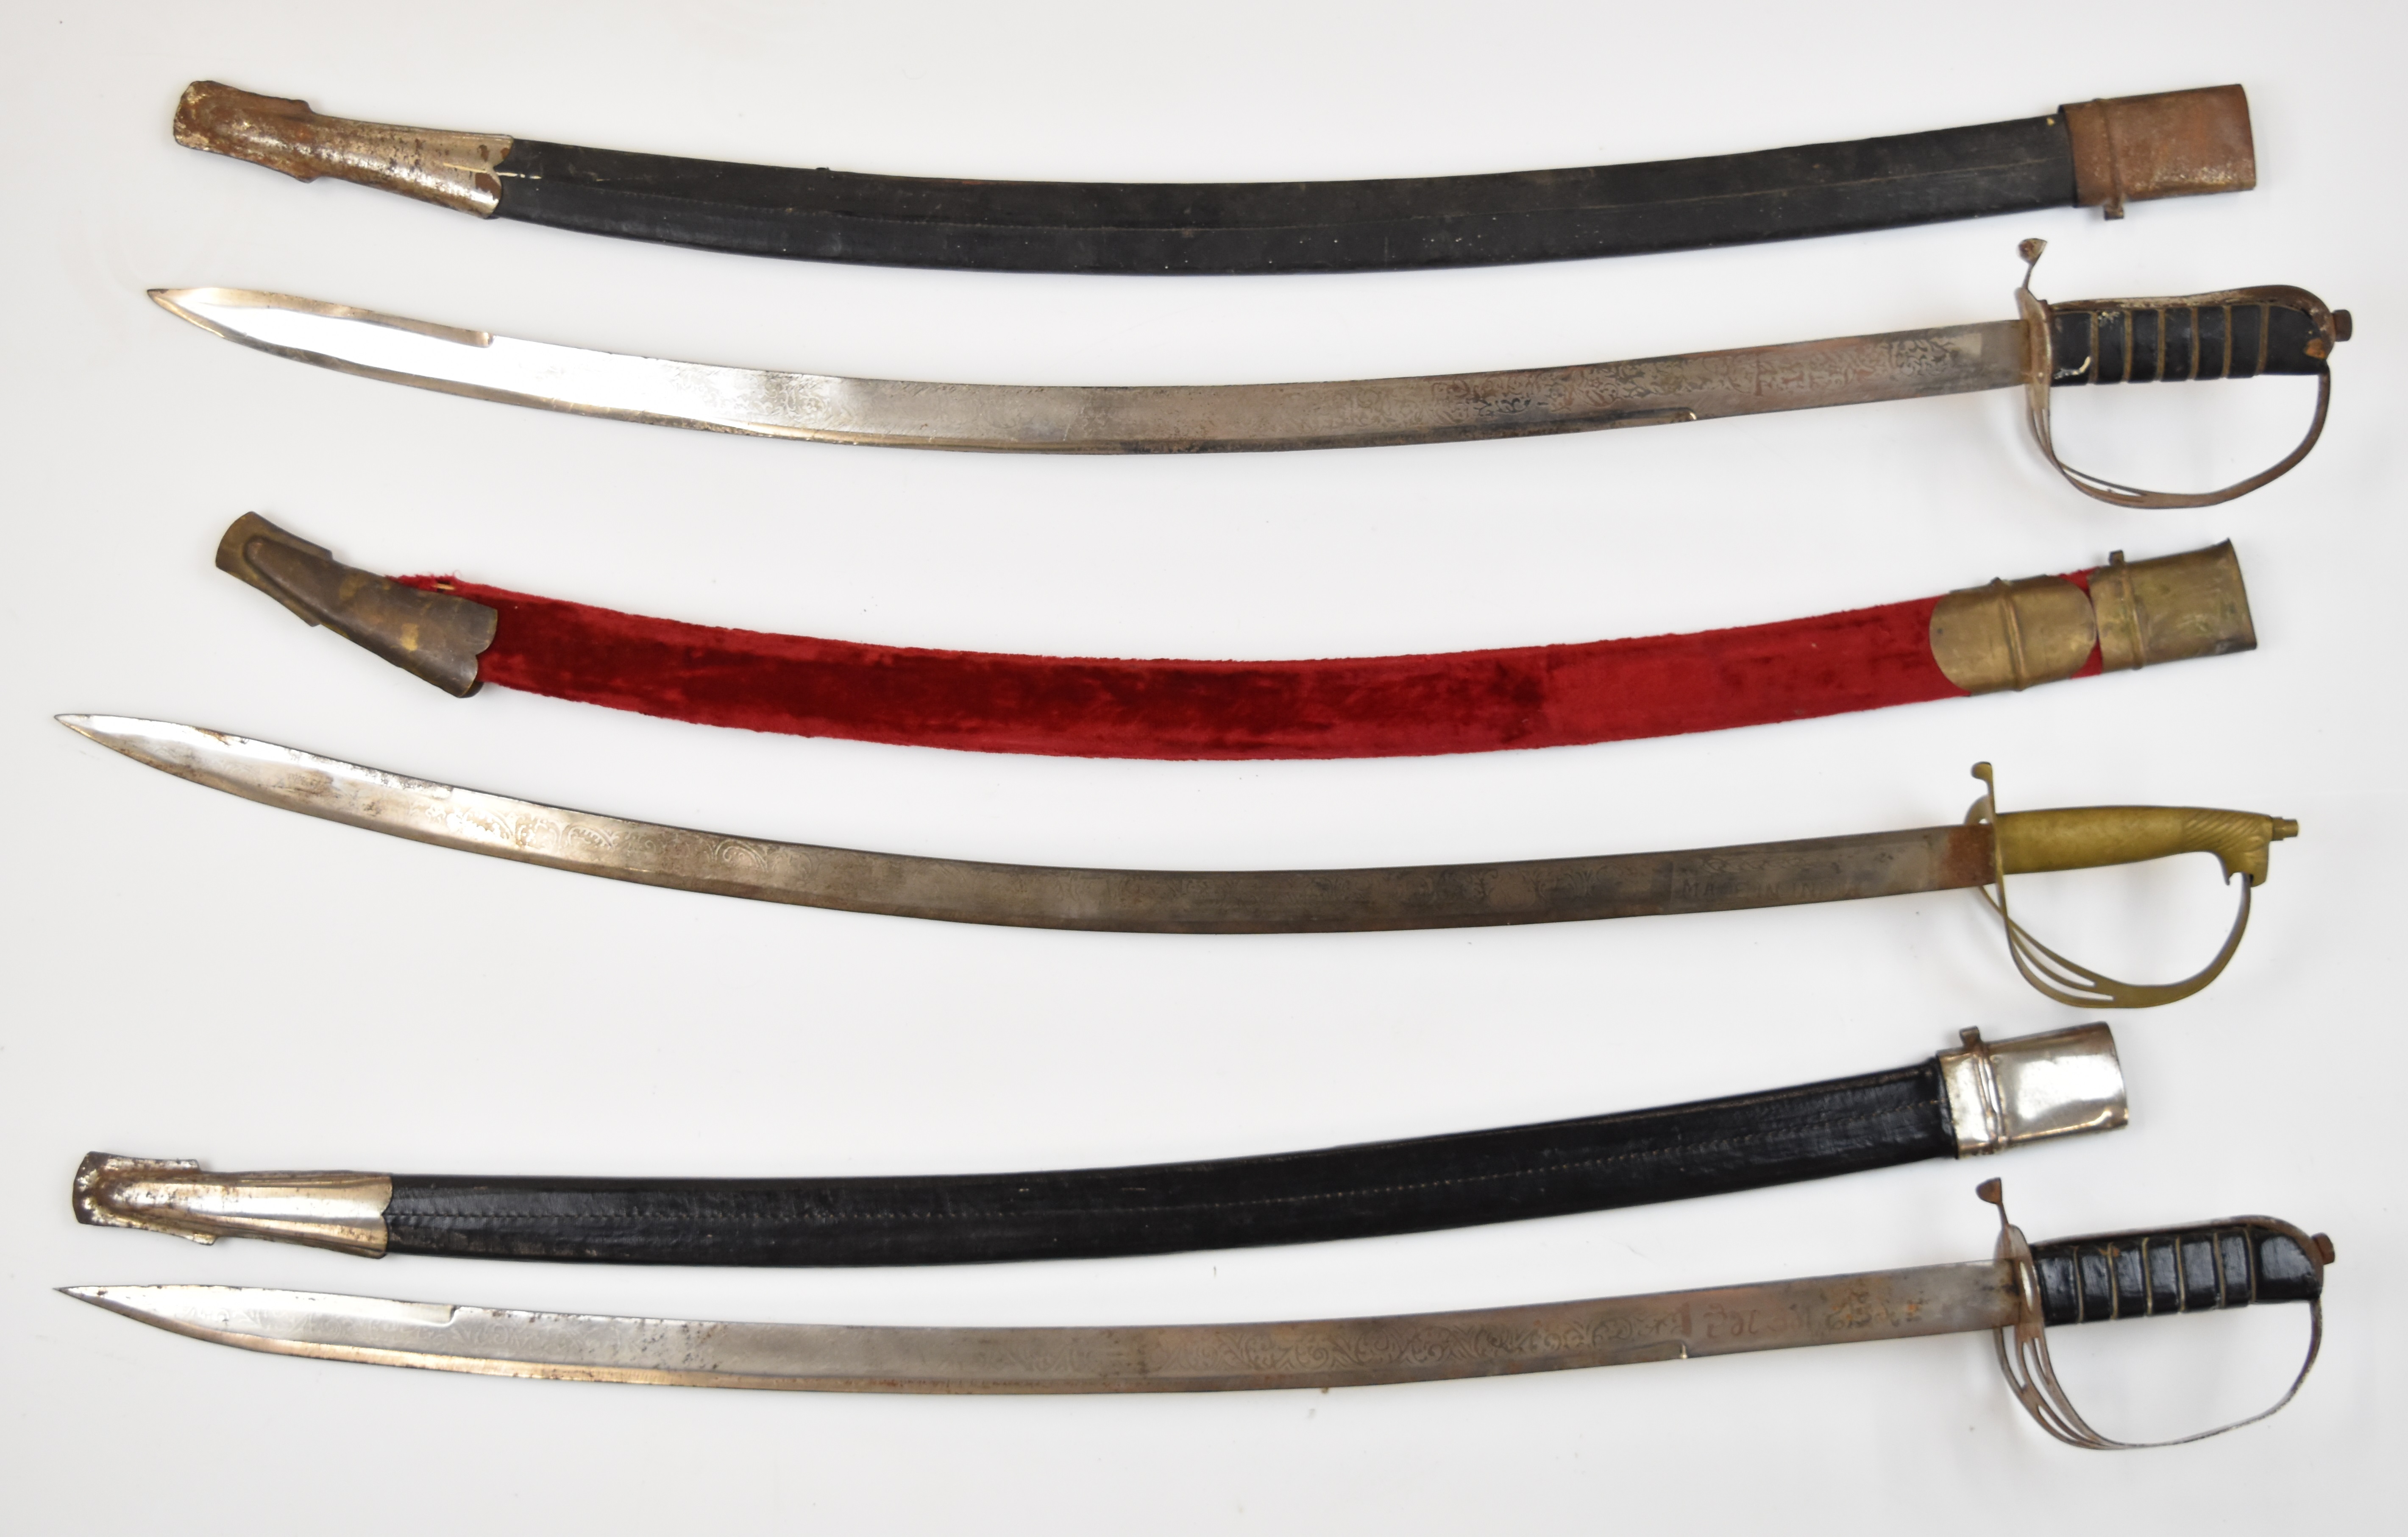 Three made in India tourist swords, longest blade 72cm. PLEASE NOTE ALL BLADED ITEMS ARE SUBJECT